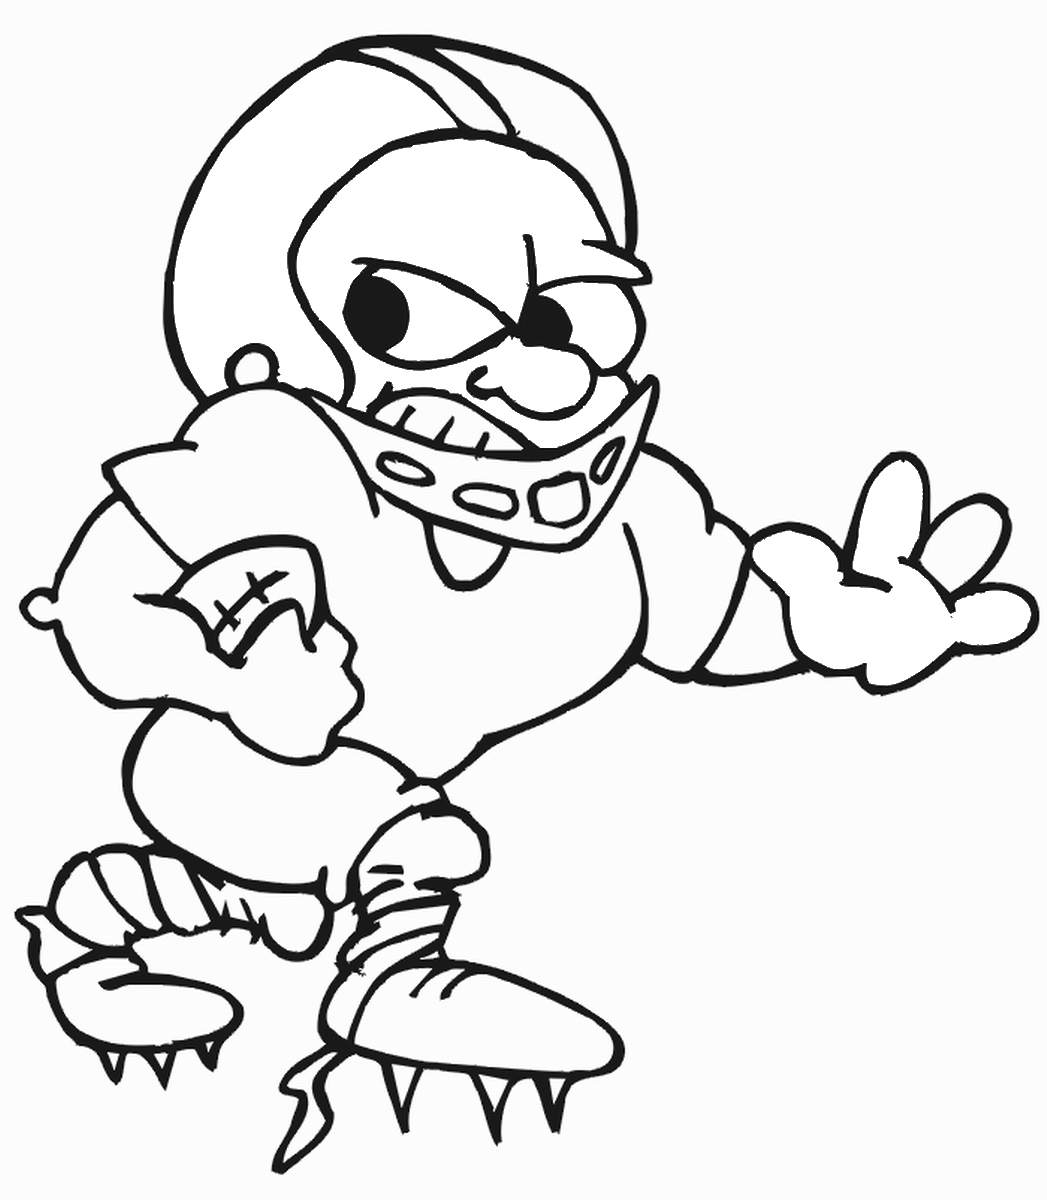 football coloring page football player coloring pages to download and print for free coloring football page 